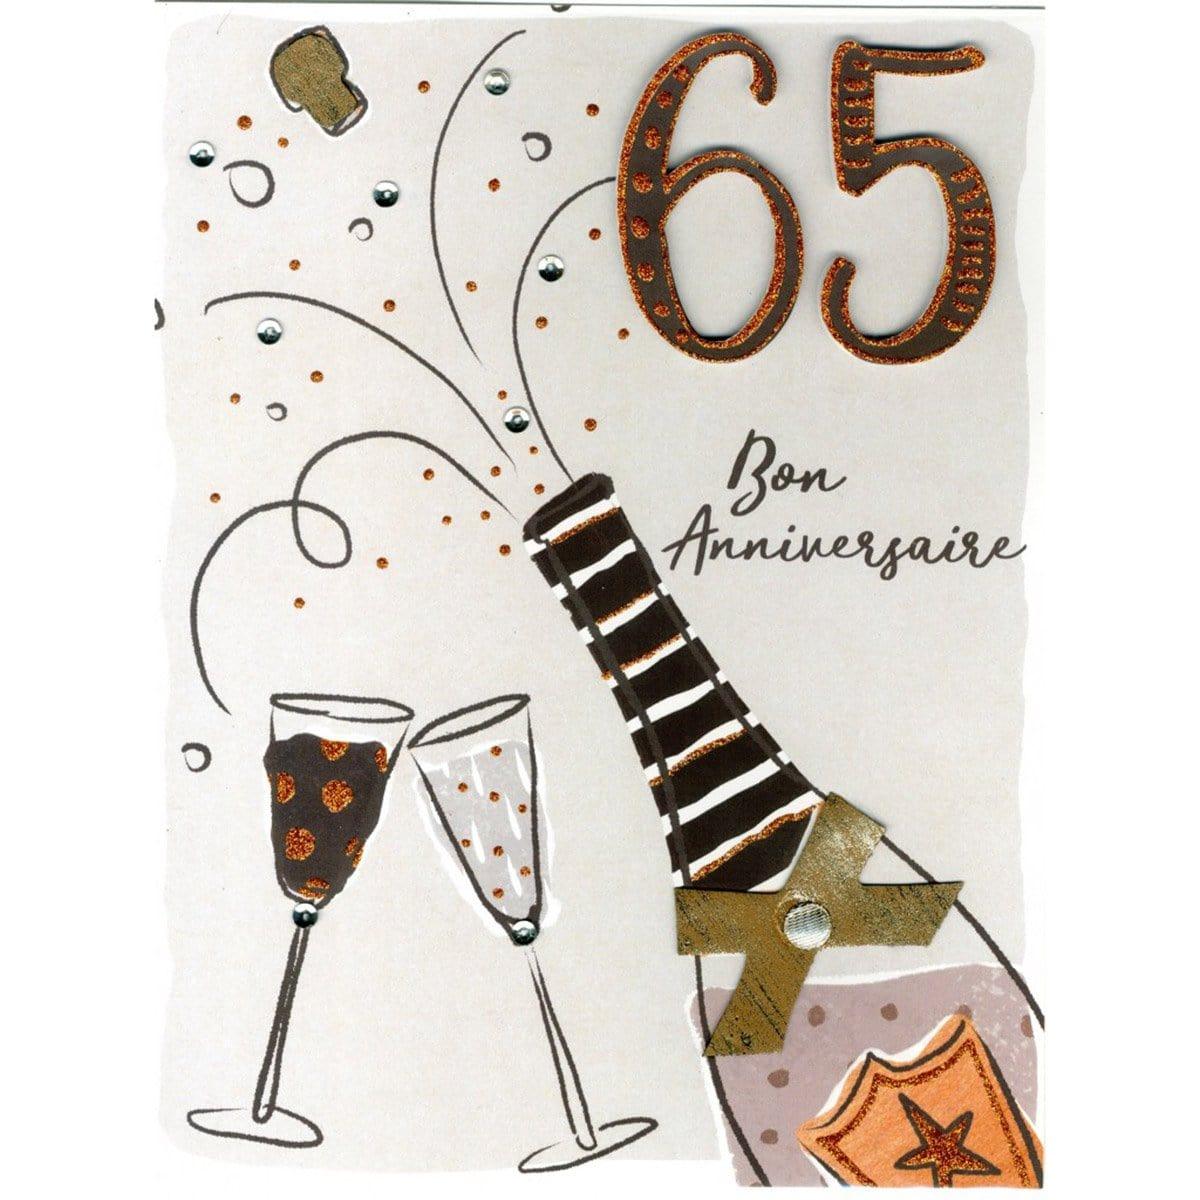 Buy Greeting Cards Gigantic Card - 65 Ans Champagne sold at Party Expert